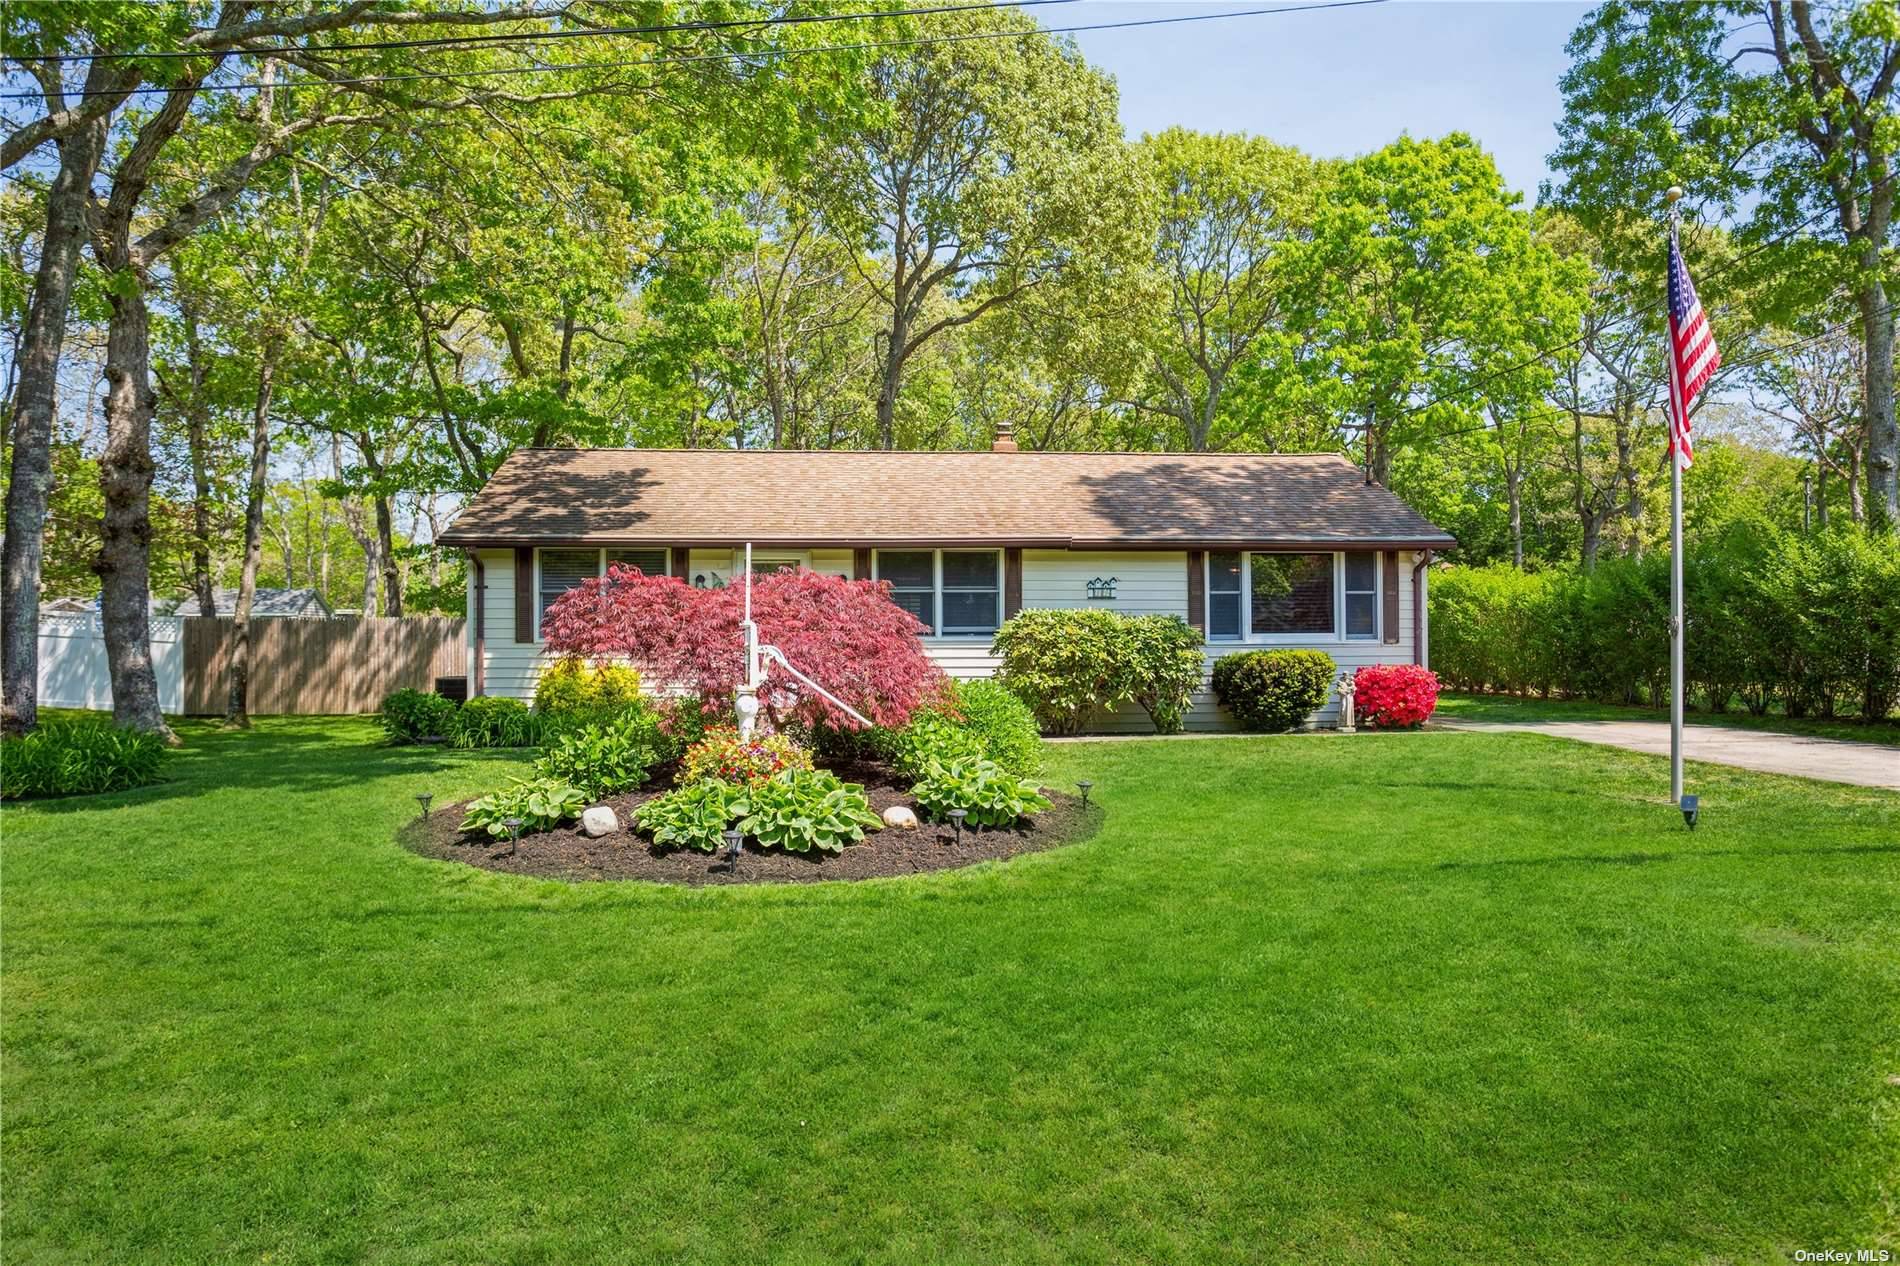 Hampton bays three bedroom primary bedroom with ensuite bathroom, two full bath house in move in condition with large living room and dining room, eat in kitchen.